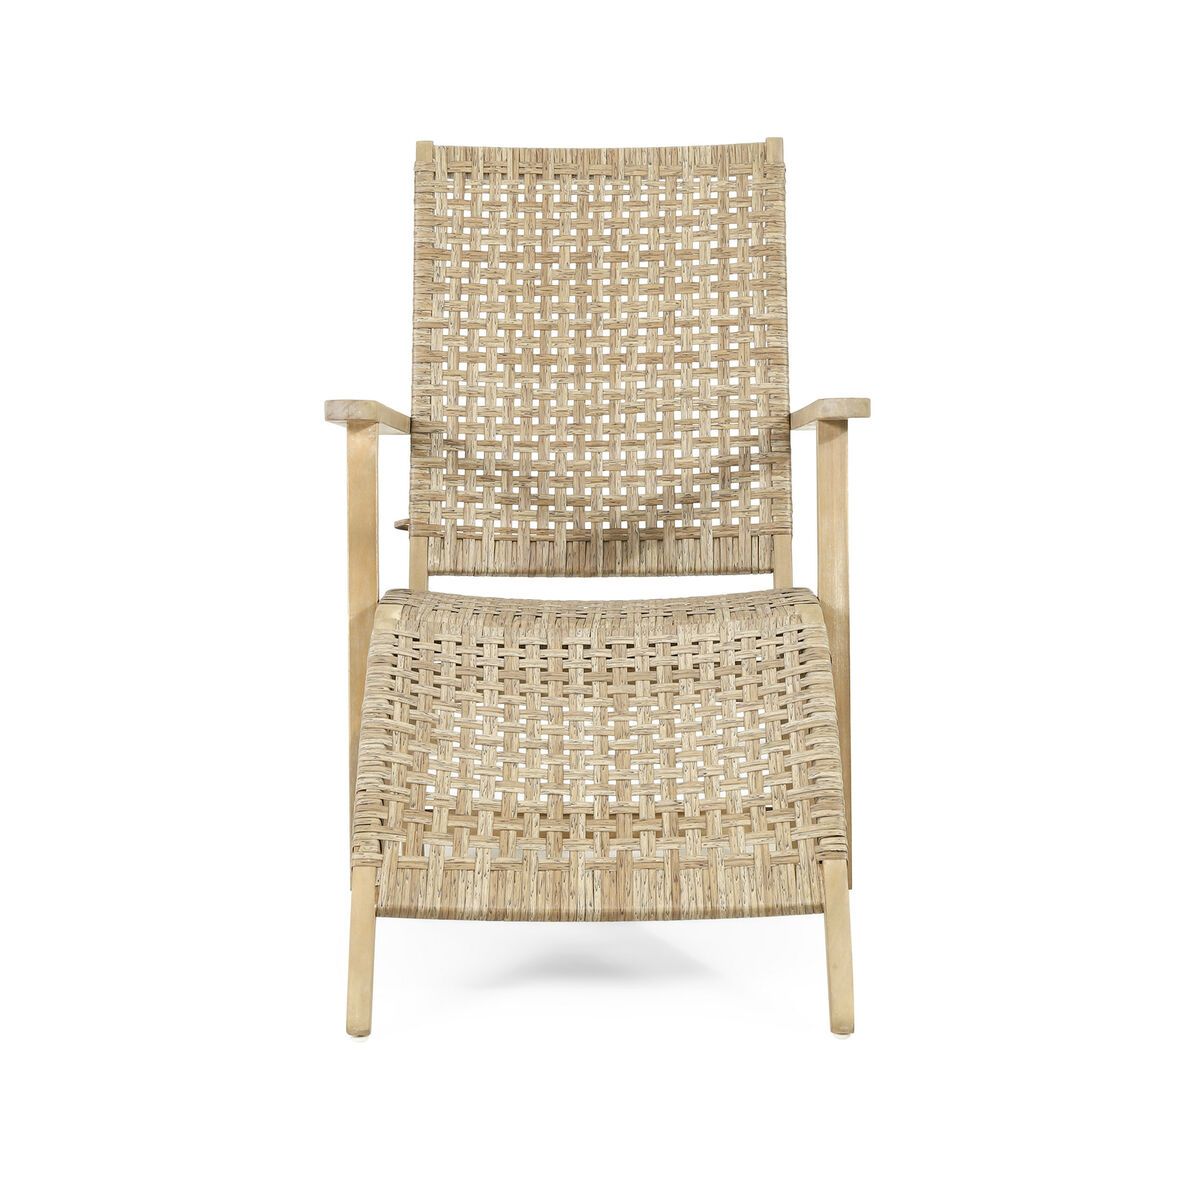 Arlost Outdoor Wicker Lounge Chair With Ottoman, Light Brown And Light  Multibrow | Ebay Within Brown Wicker Chairs With Ottoman (View 5 of 15)